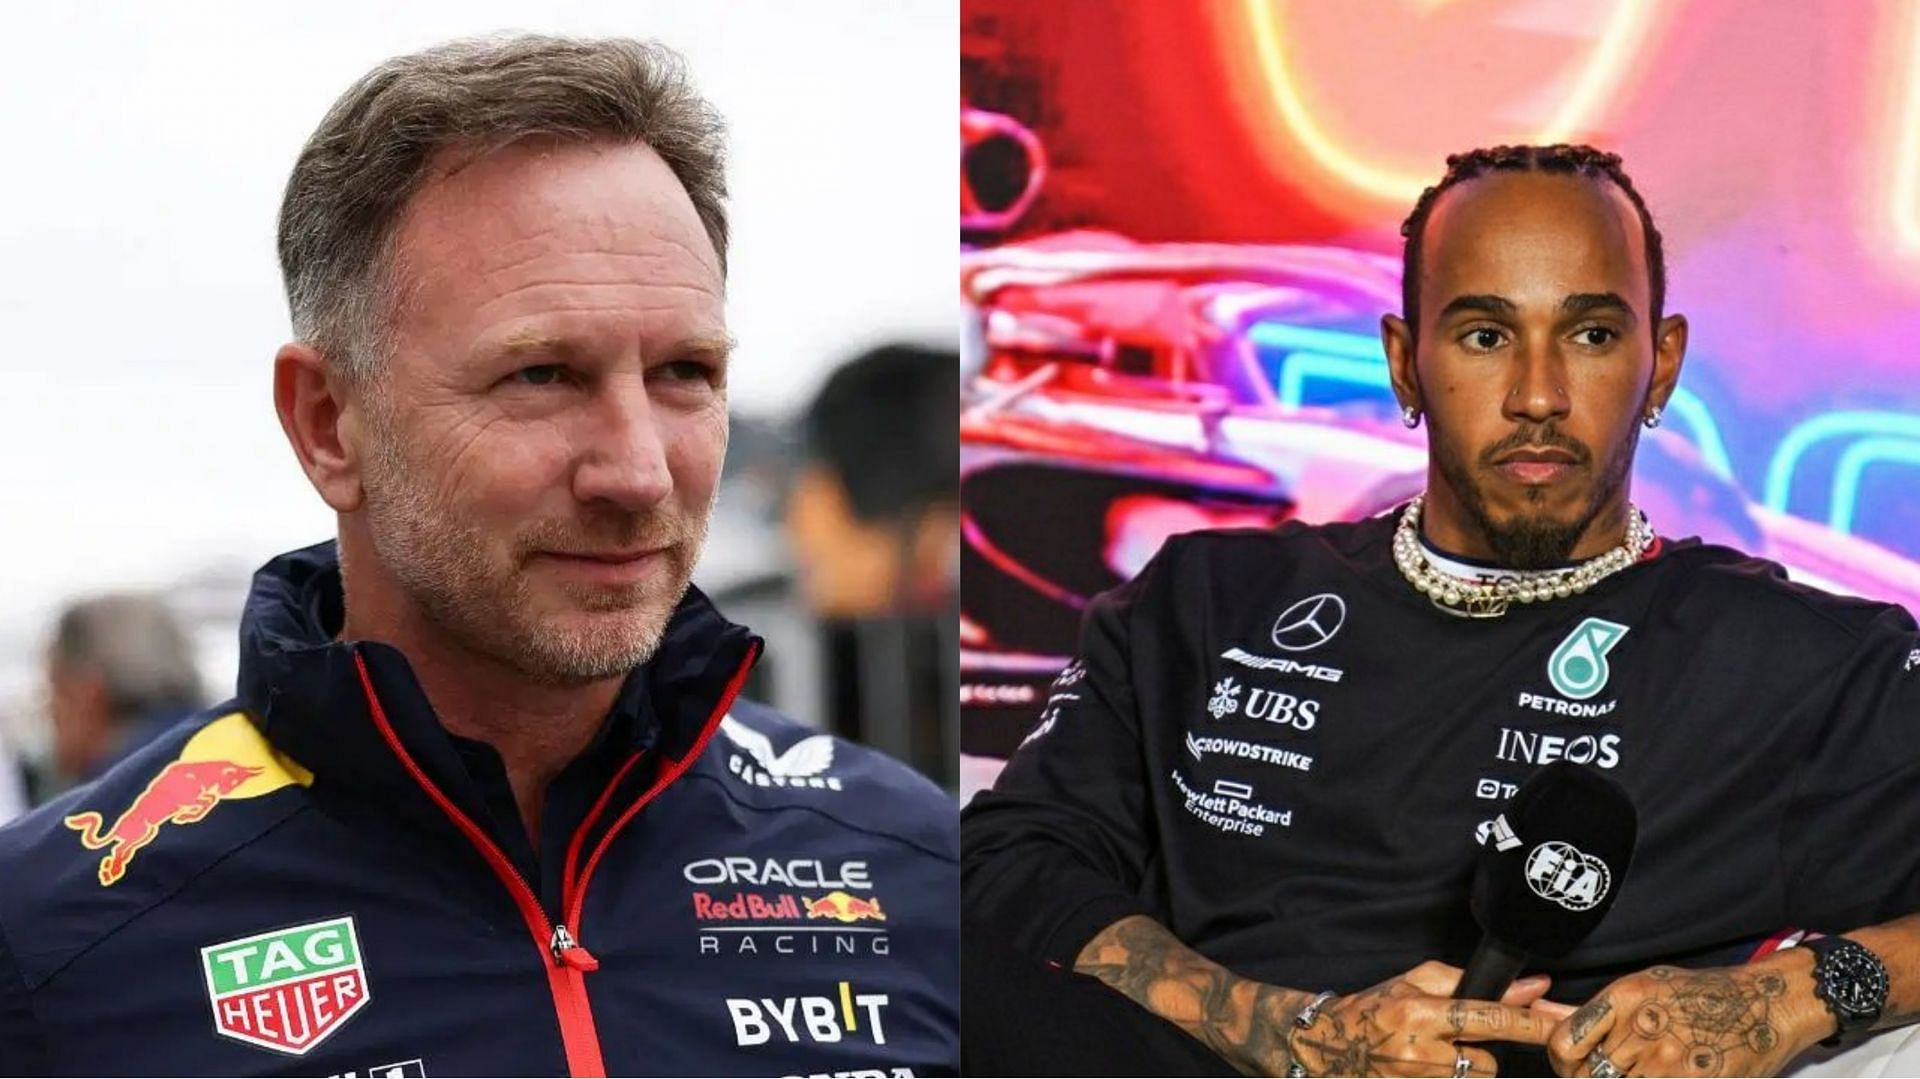 Red Bull team principal Christian Horner has been awarded with the honor of &quot;CBE&quot;, moving him a step closer towards receiving the knighthood like Lewis Hamilton